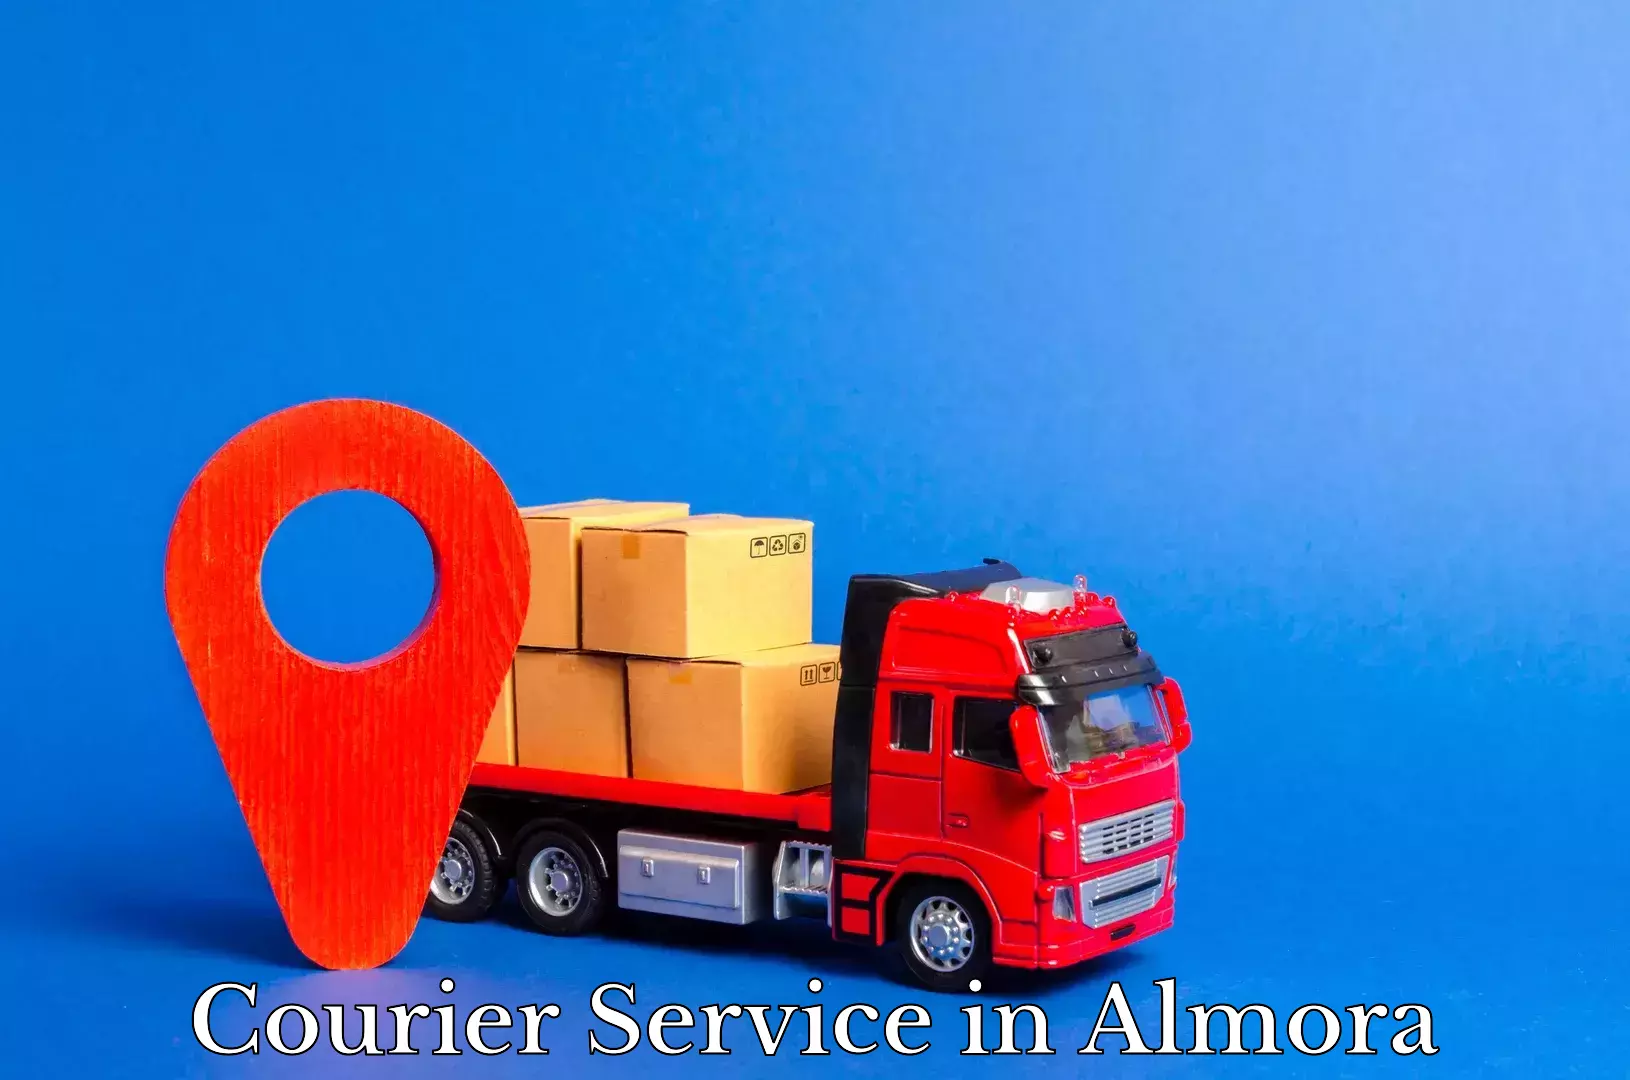 Fast shipping solutions in Almora